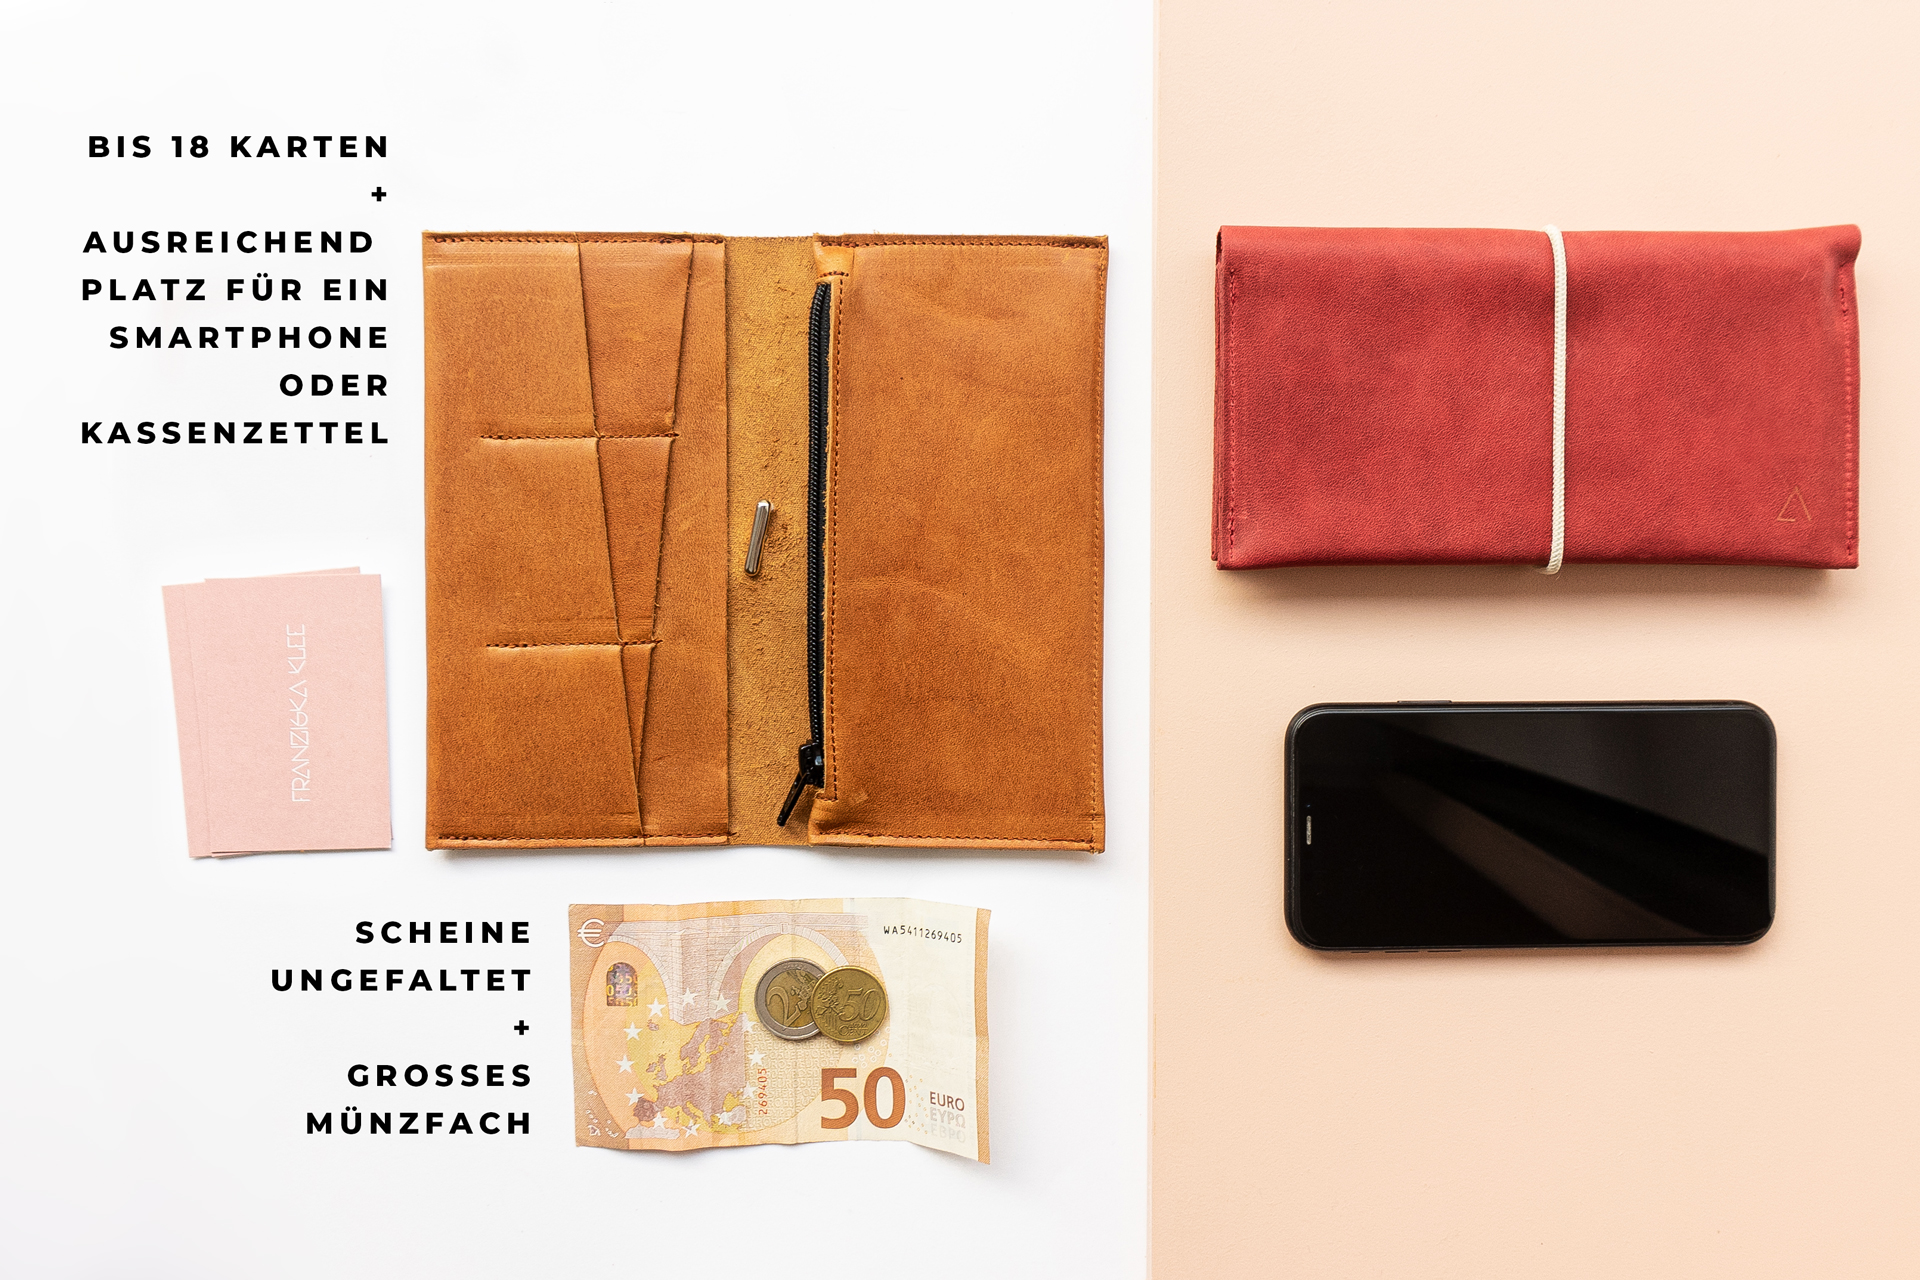 Our OLI LArge wallet can hold up to 18 cards, bills, coins and even your smartphone.